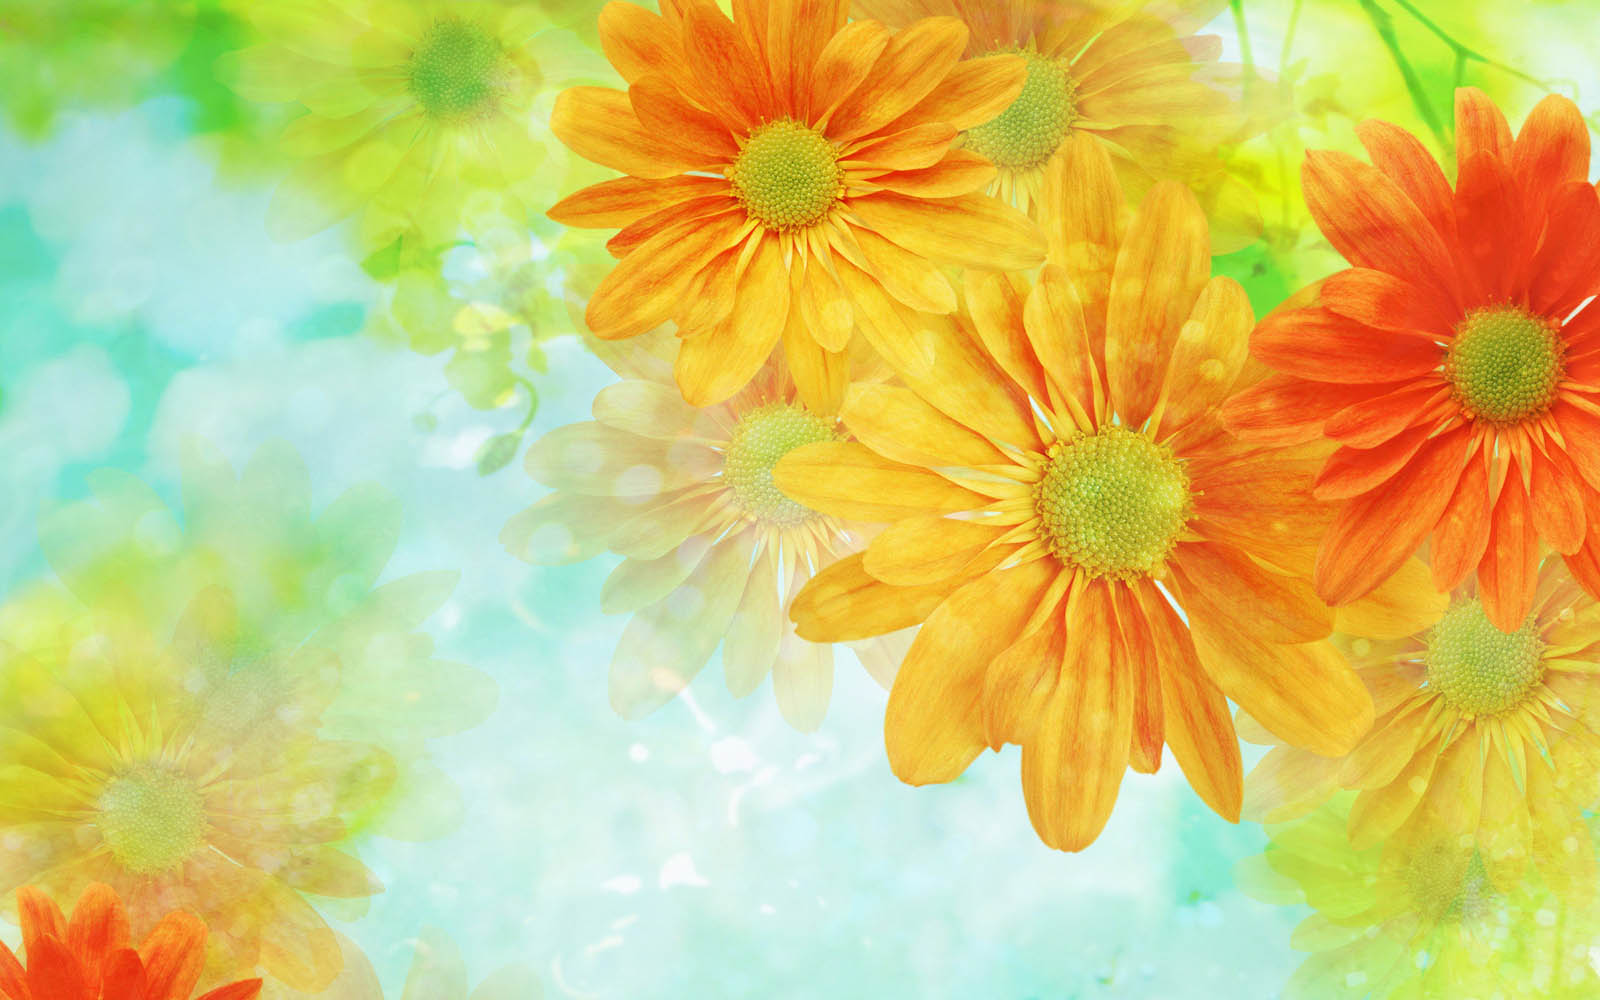 Tag Flower Art Wallpaper Background Photos Image And Pictures